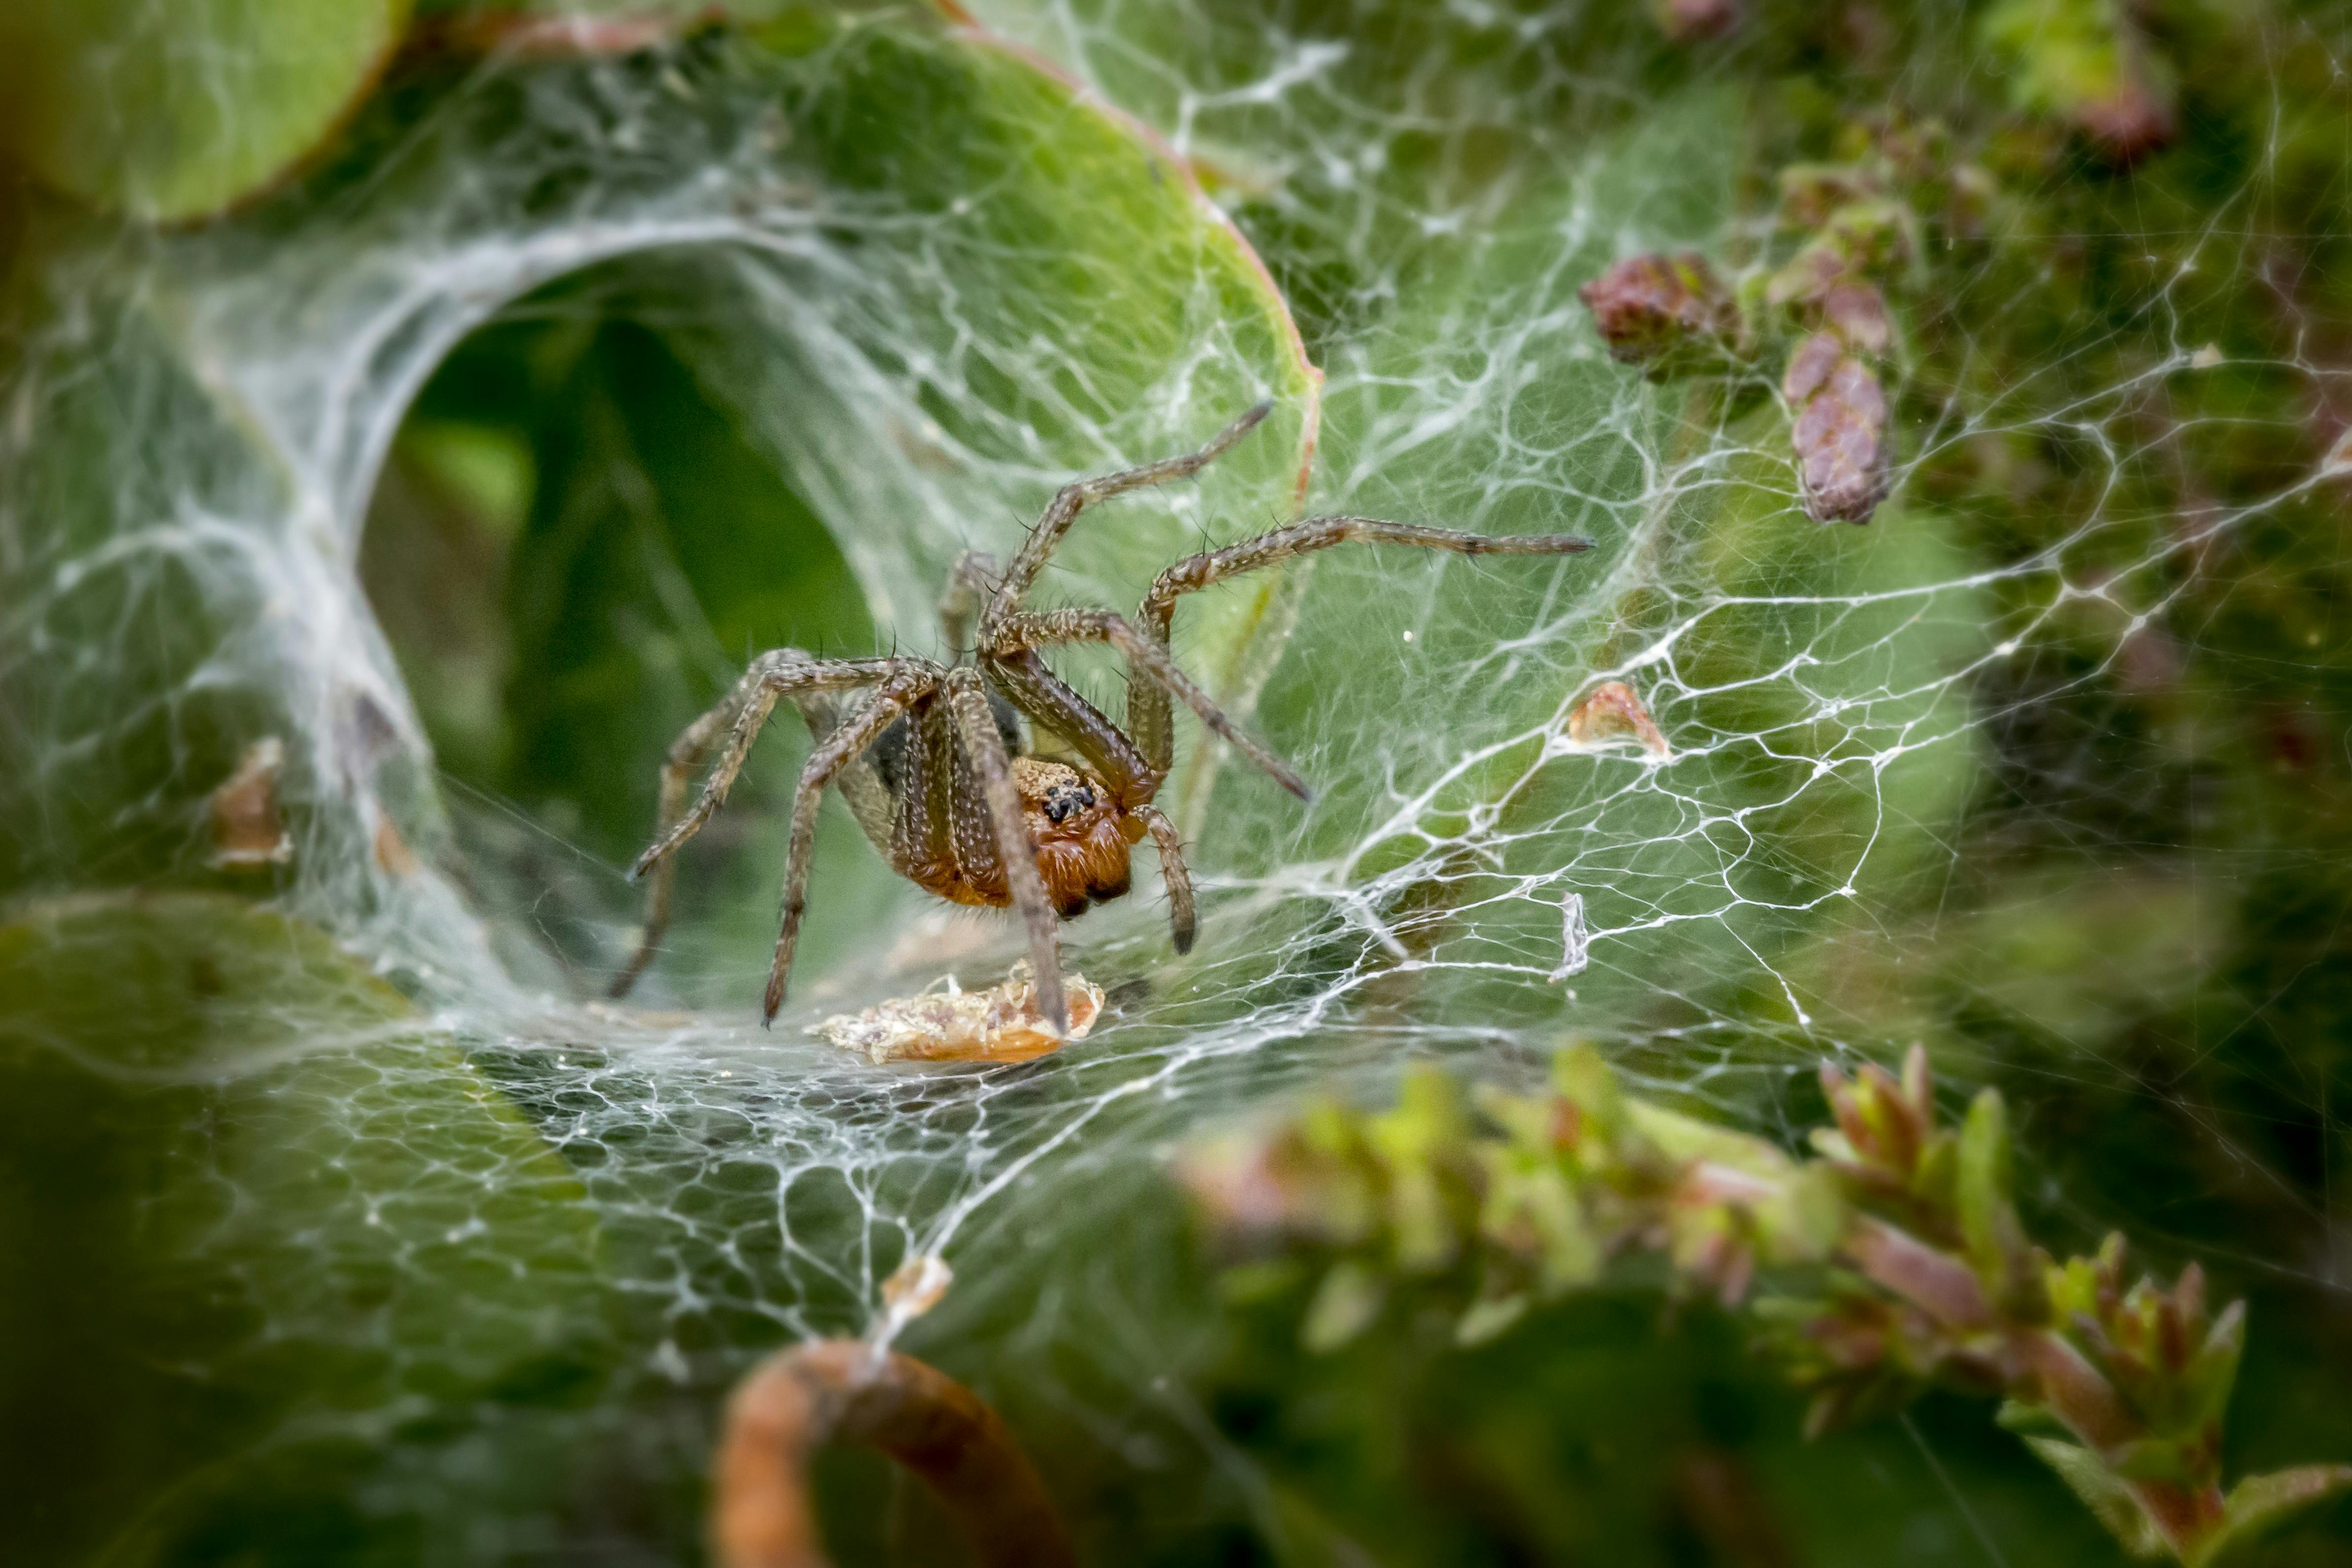 A brown funnel weaver spider on its funnel shaped web